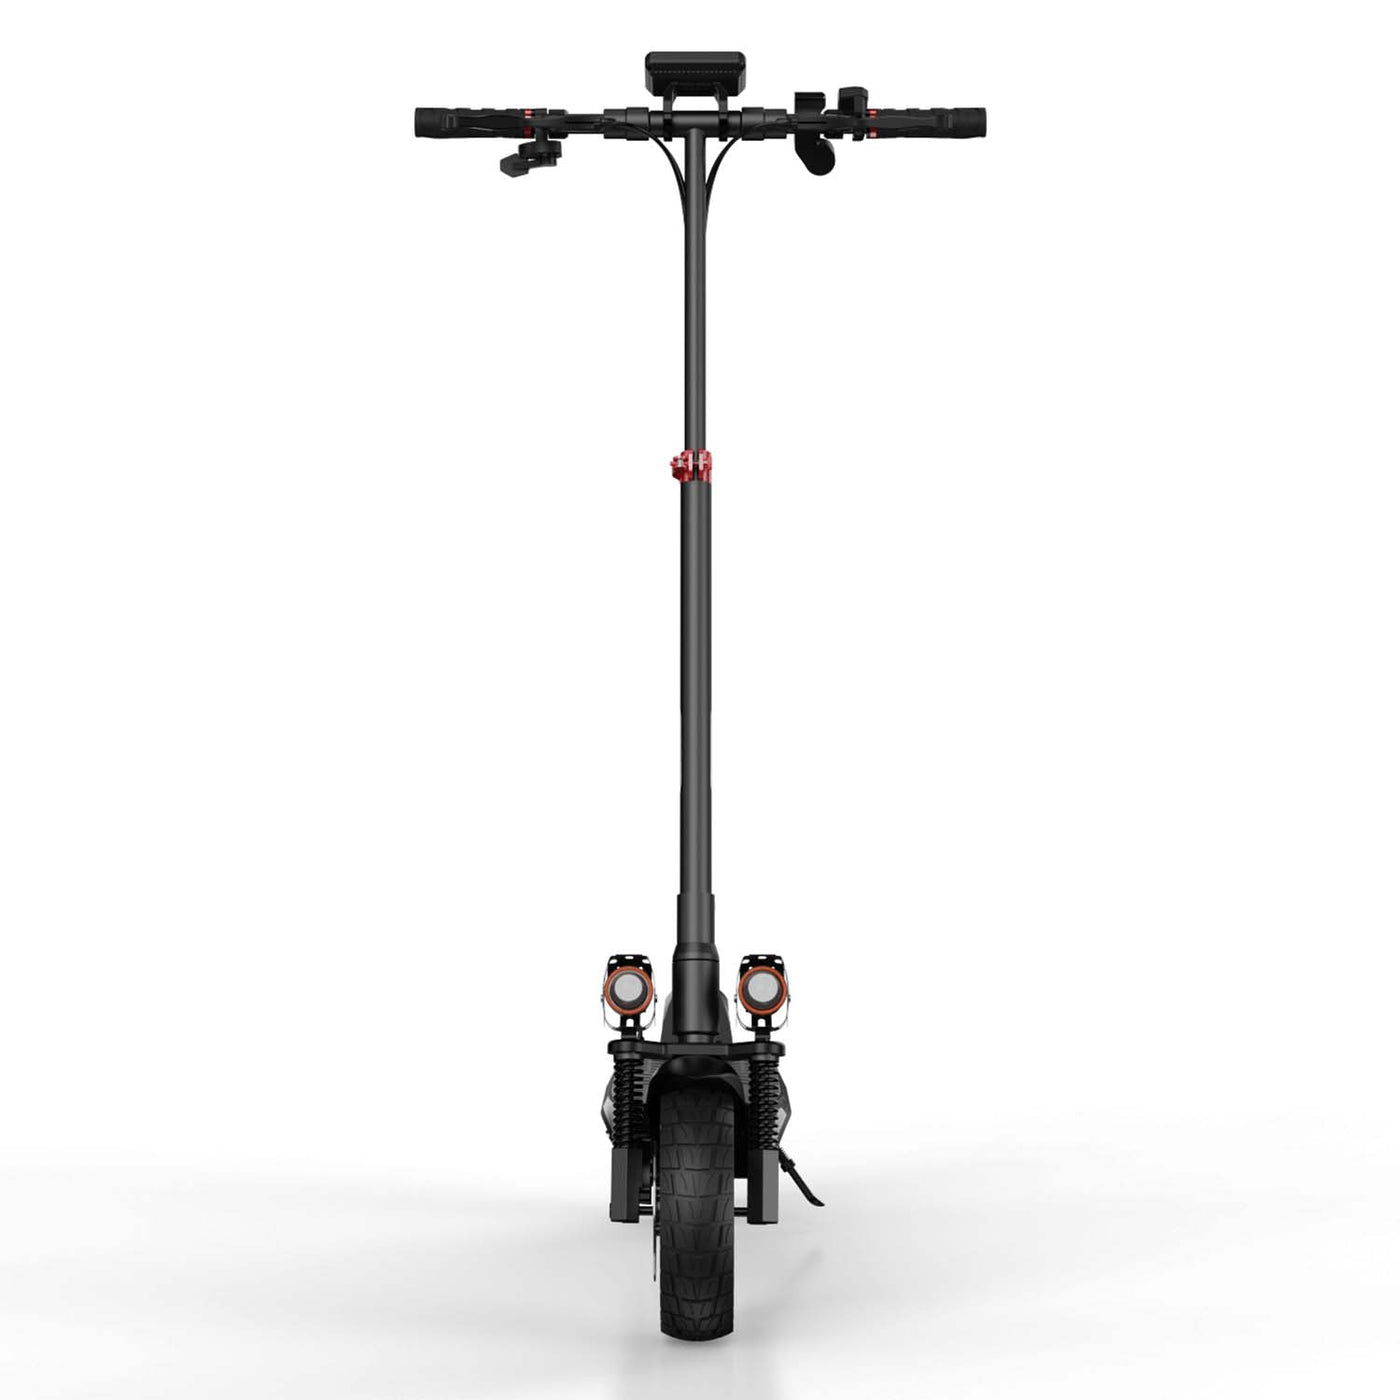 iScooter iX4 800W Off Road Electric Scooter with APP Control